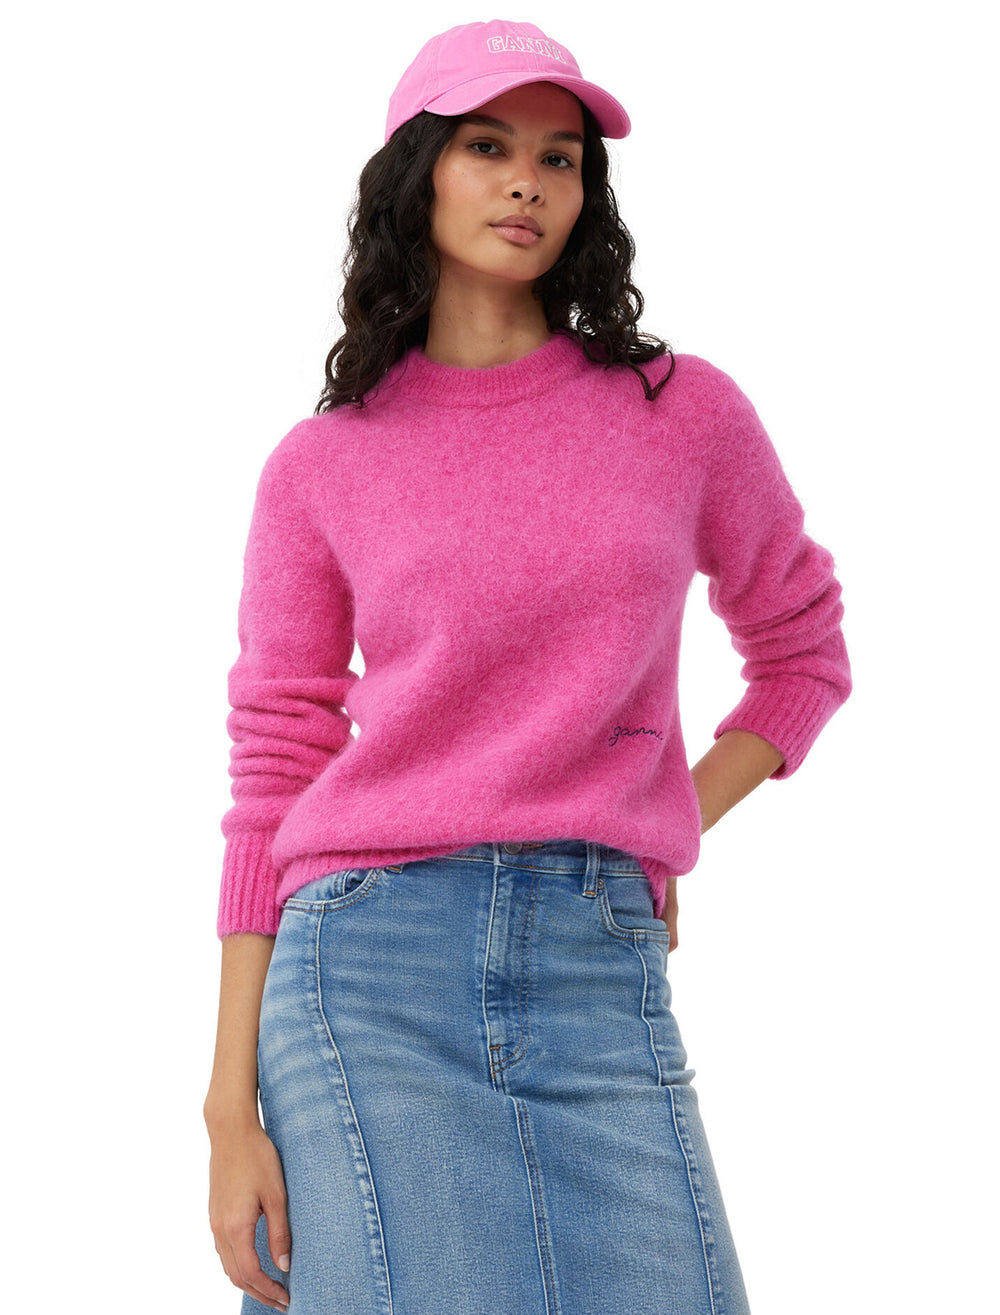 Model wearing GANNI's brushed alpaca o-neck pullover in cone flower.